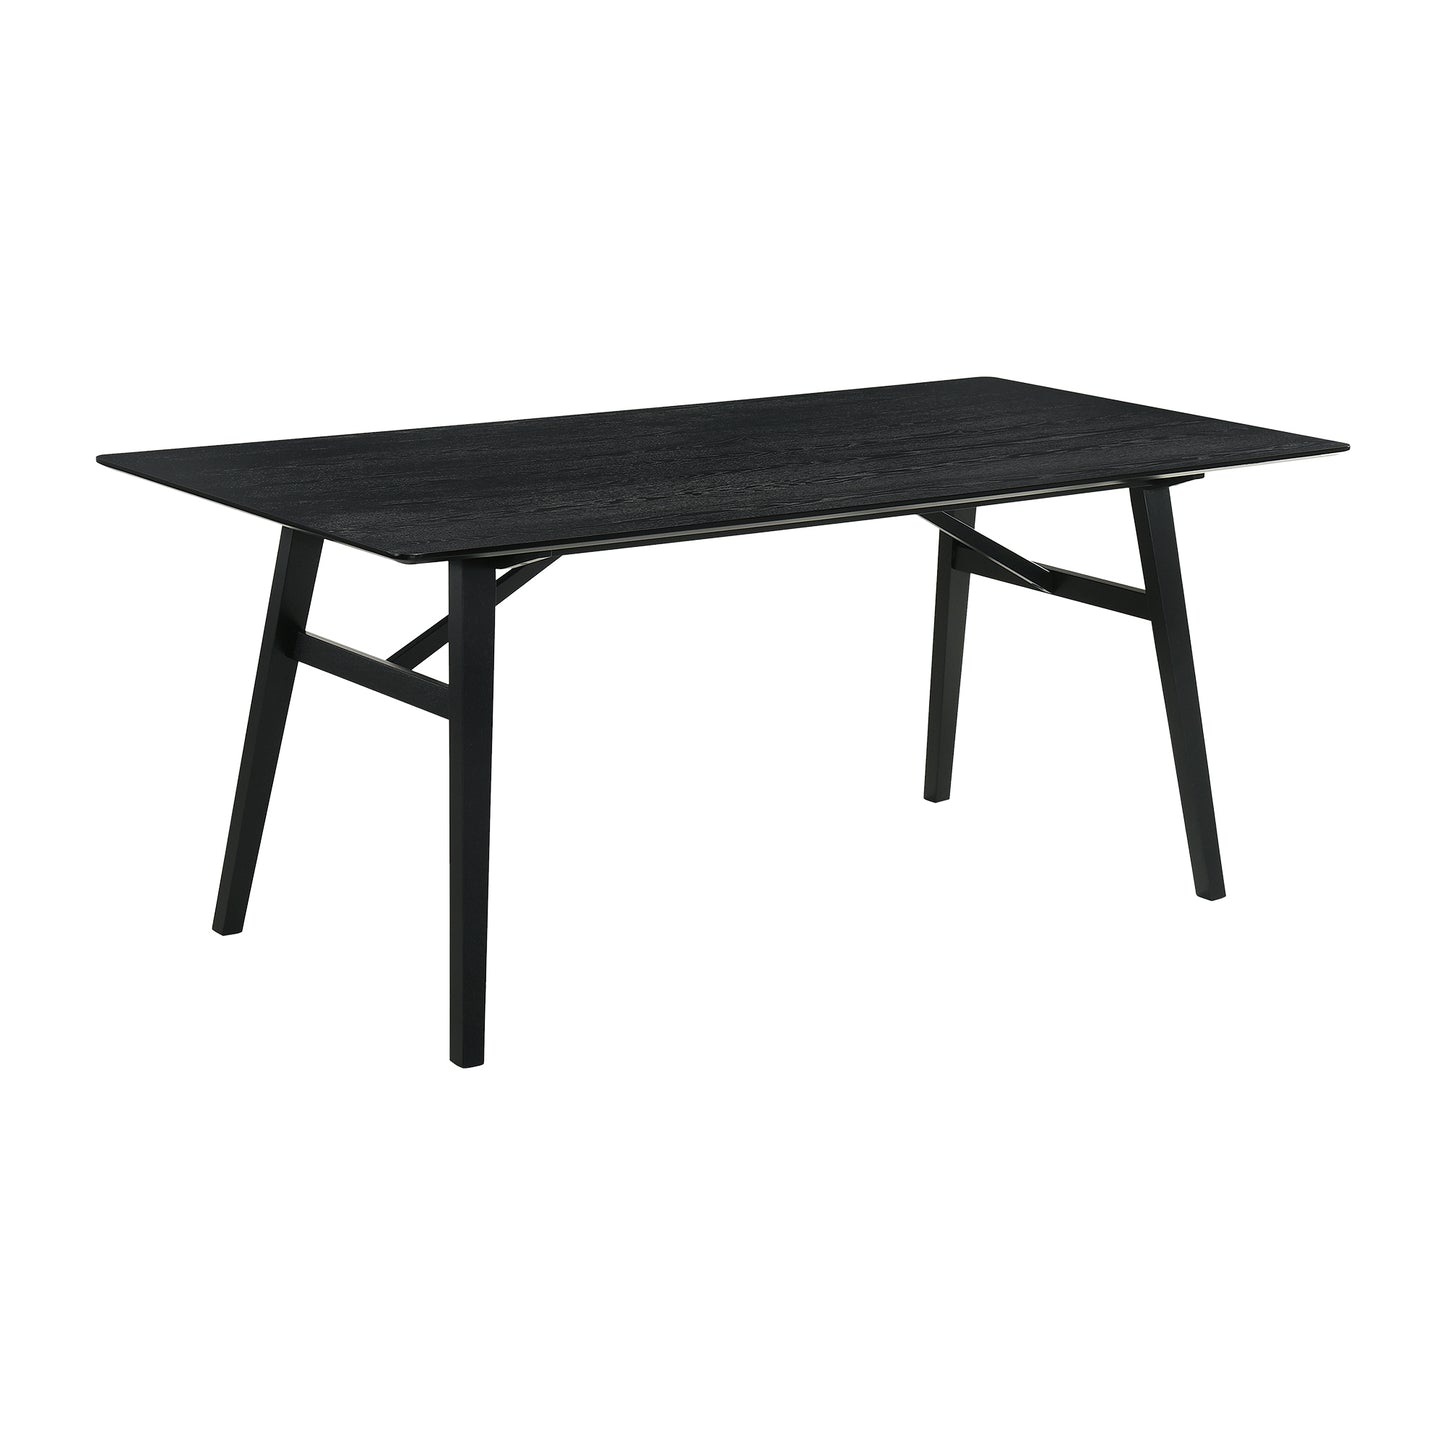 Channell 6 Piece Black Wood Dining Table Set with Bench in Charcoal Fabric